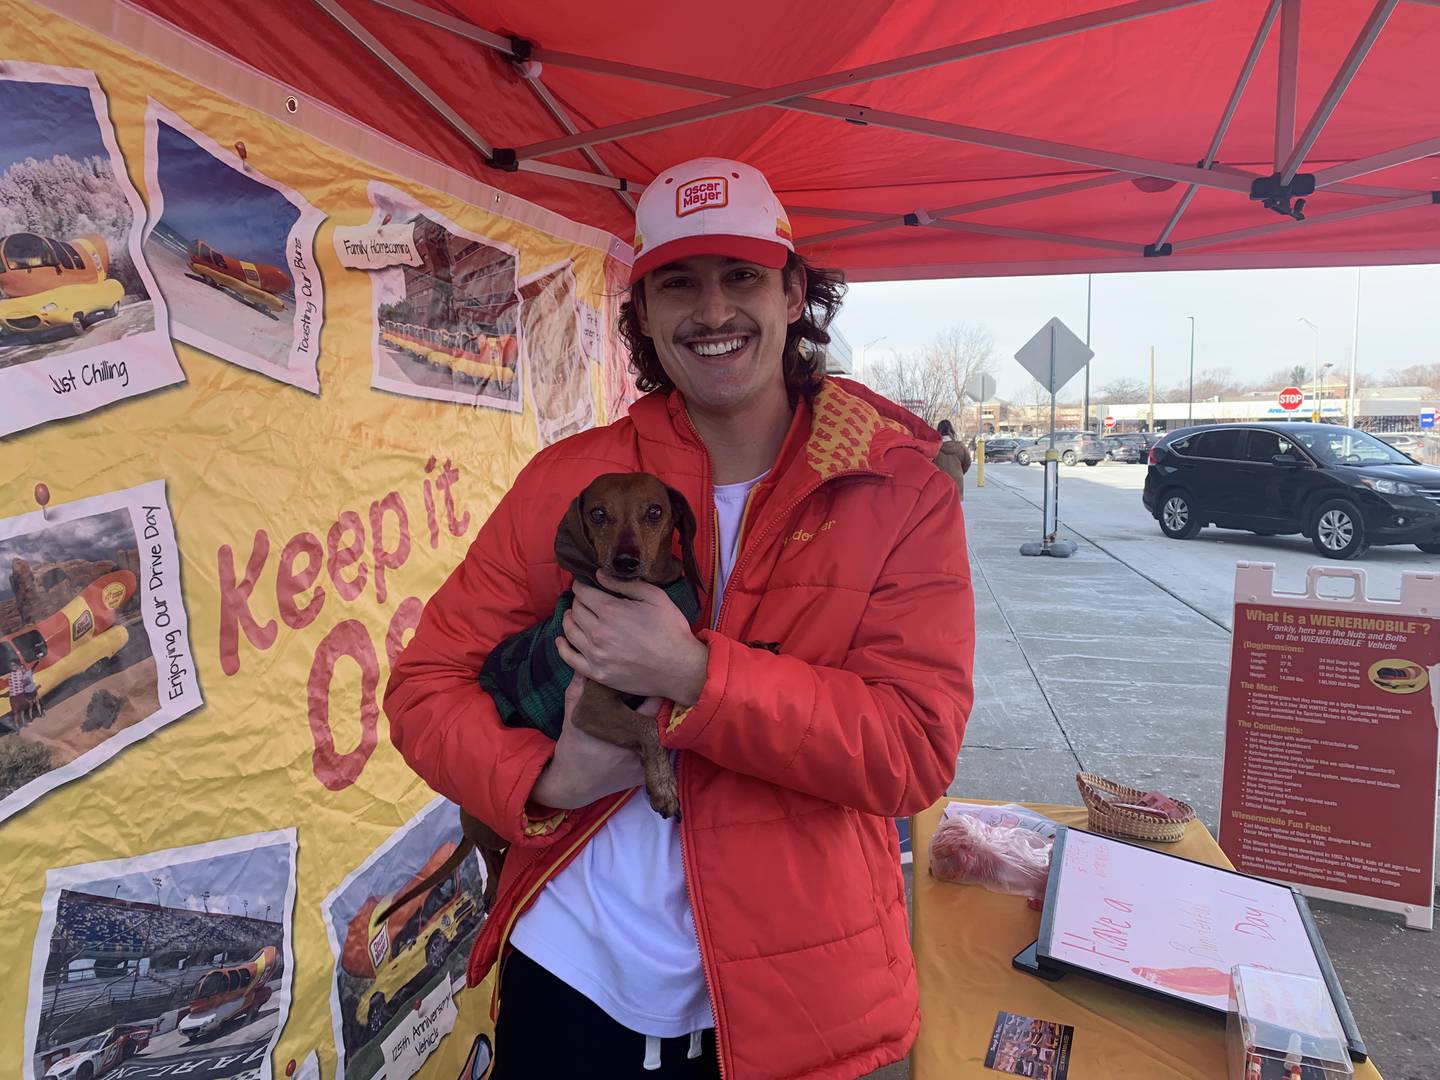 Brandon Mazzaferro of Crystal Lake and the driver of the Oscar Mayer Wienermobile with his wiener dog, Reggie, outside Mariano's in Crystal Lake on Sunday, Jan. 16, 2022.